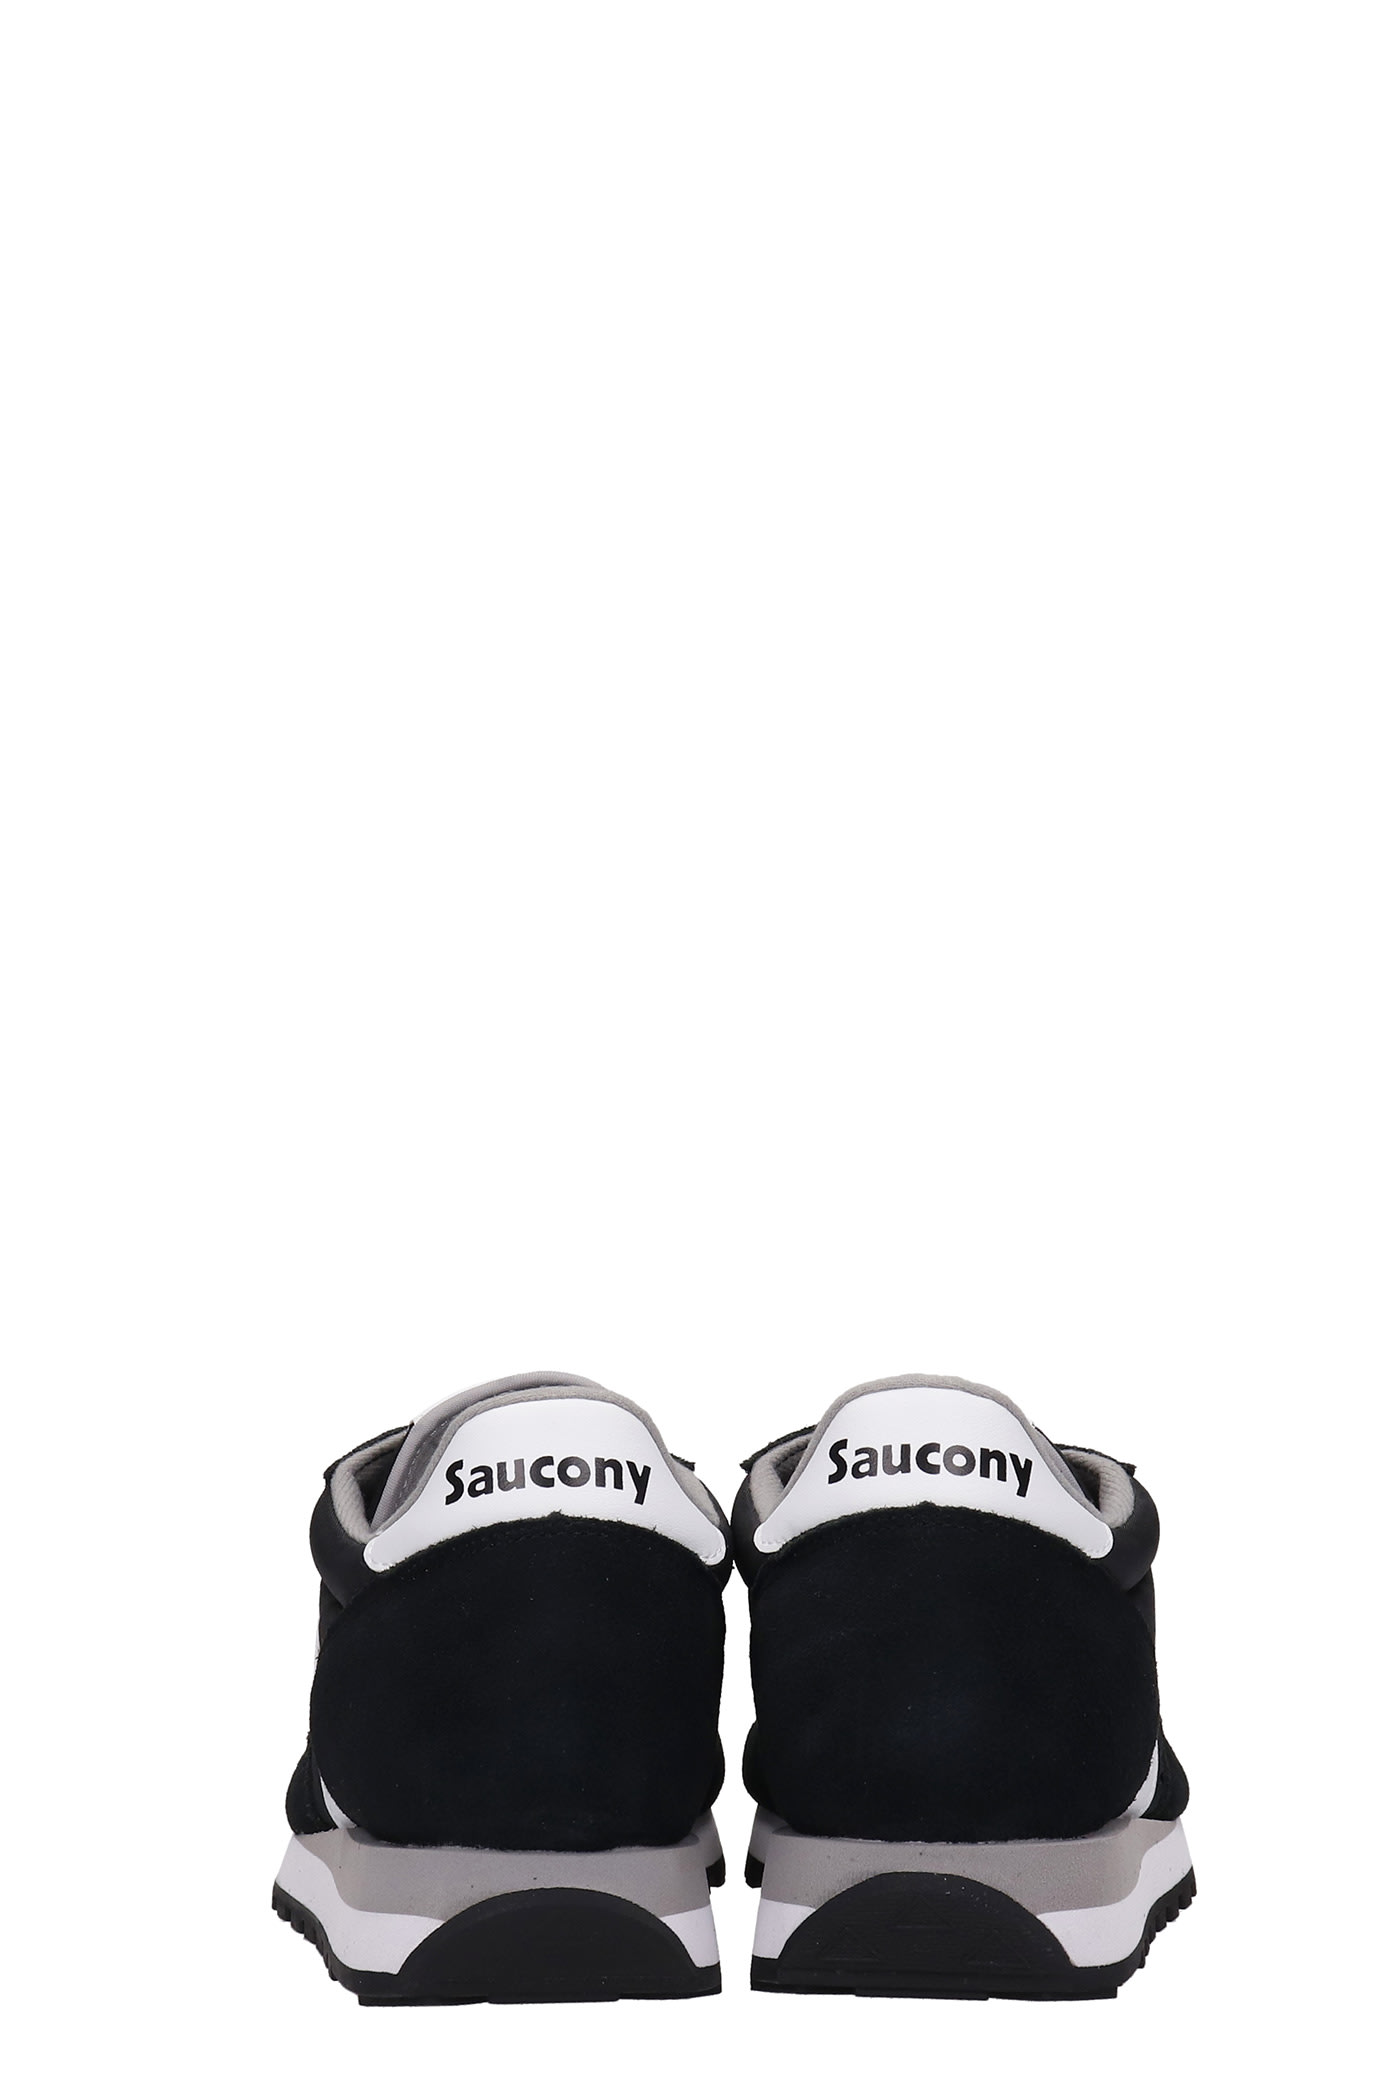 Shop Saucony Jazz Original Sneakers In Black Suede And Fabric In Blk/wht